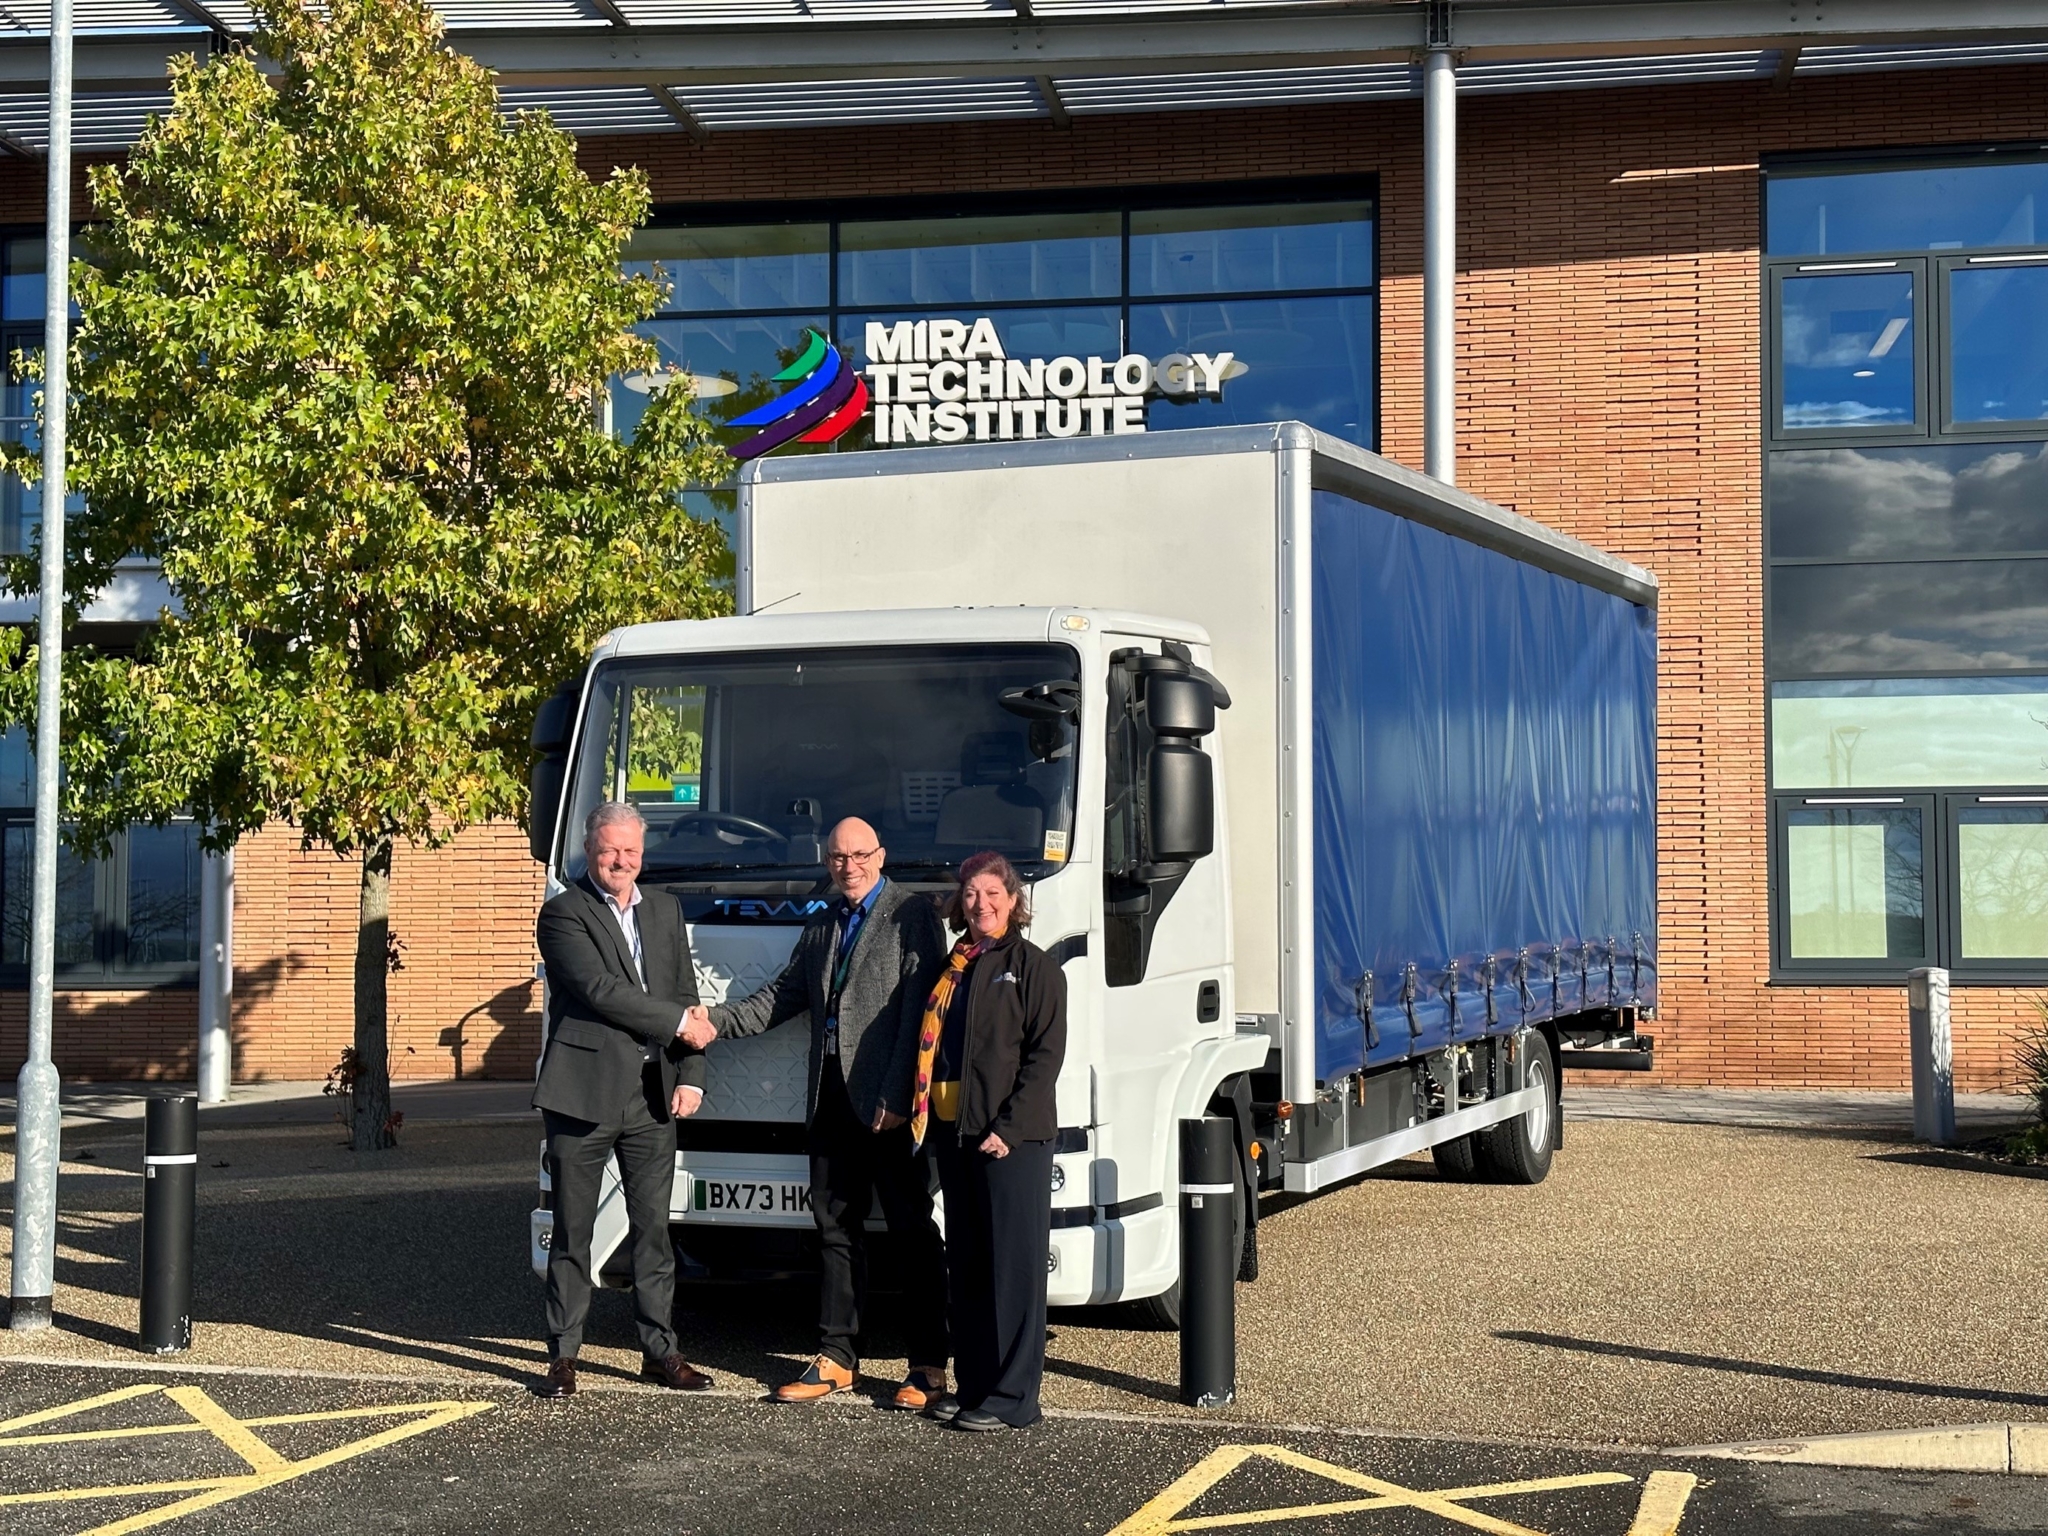 Battery-electric Tevva truck set to drive skills at Mira Technology Institute